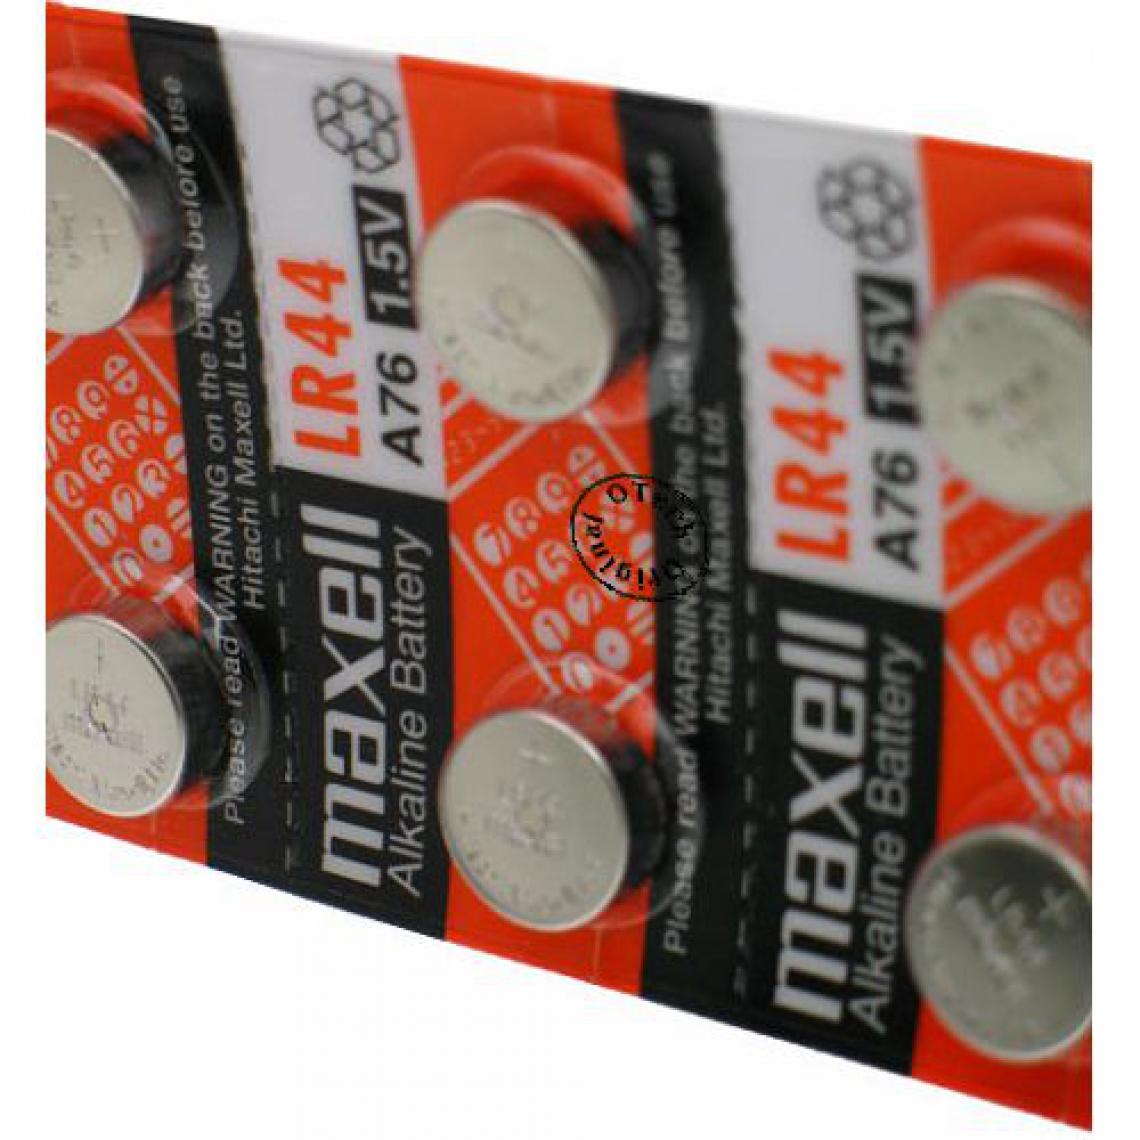 Otech - Pack de 10 piles maxell pour MAXELL A76 - Piles rechargeables